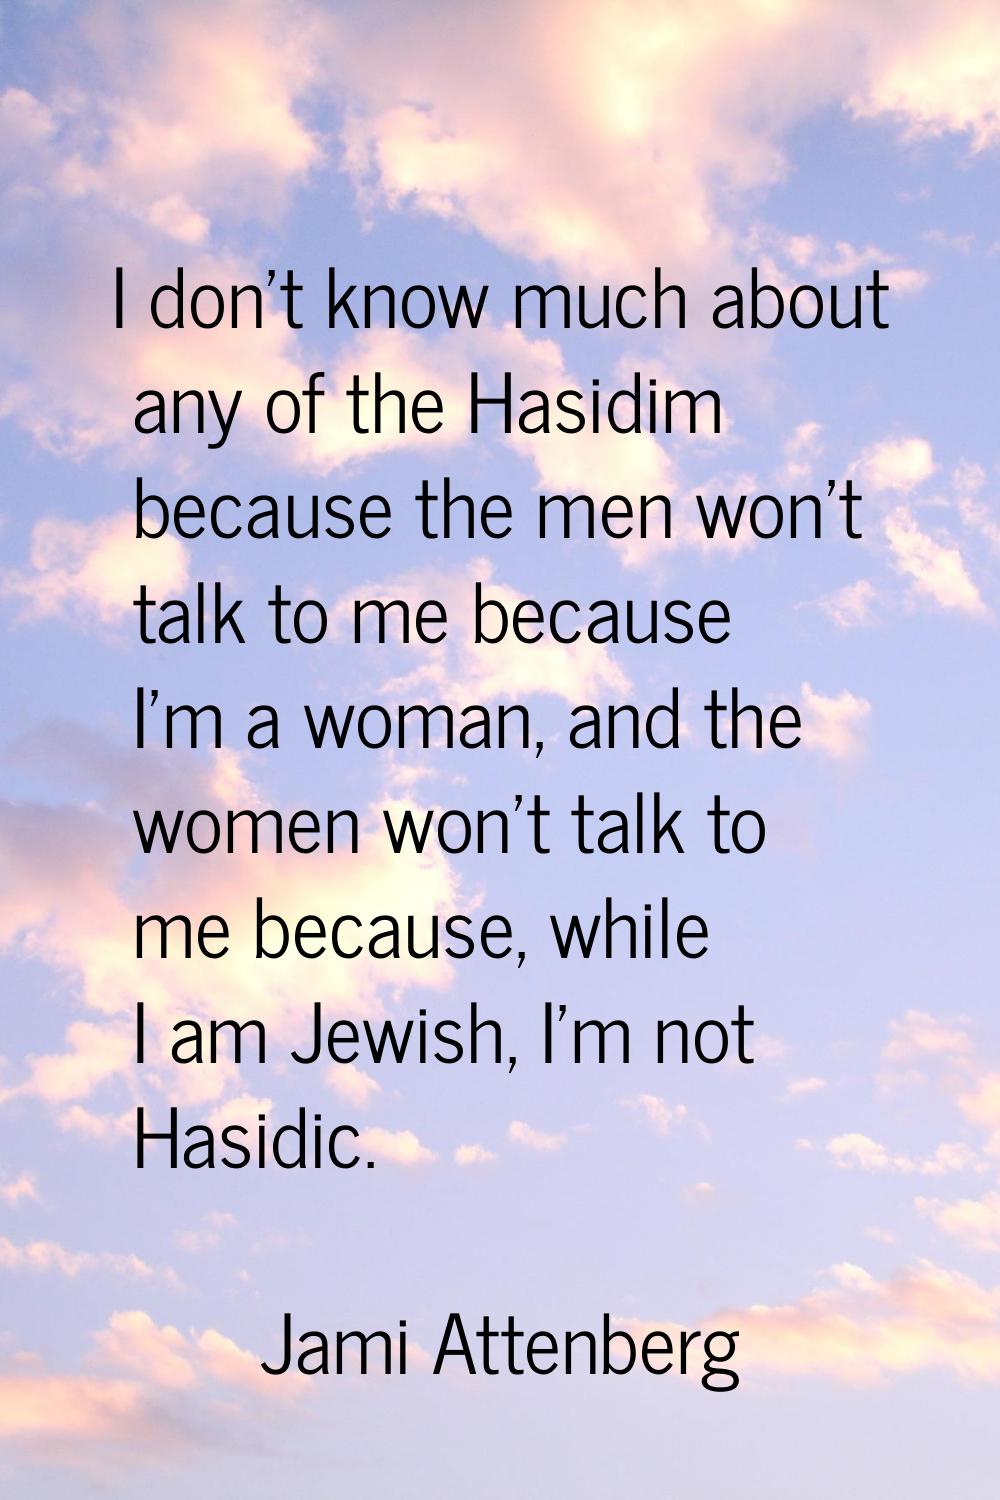 I don't know much about any of the Hasidim because the men won't talk to me because I'm a woman, an